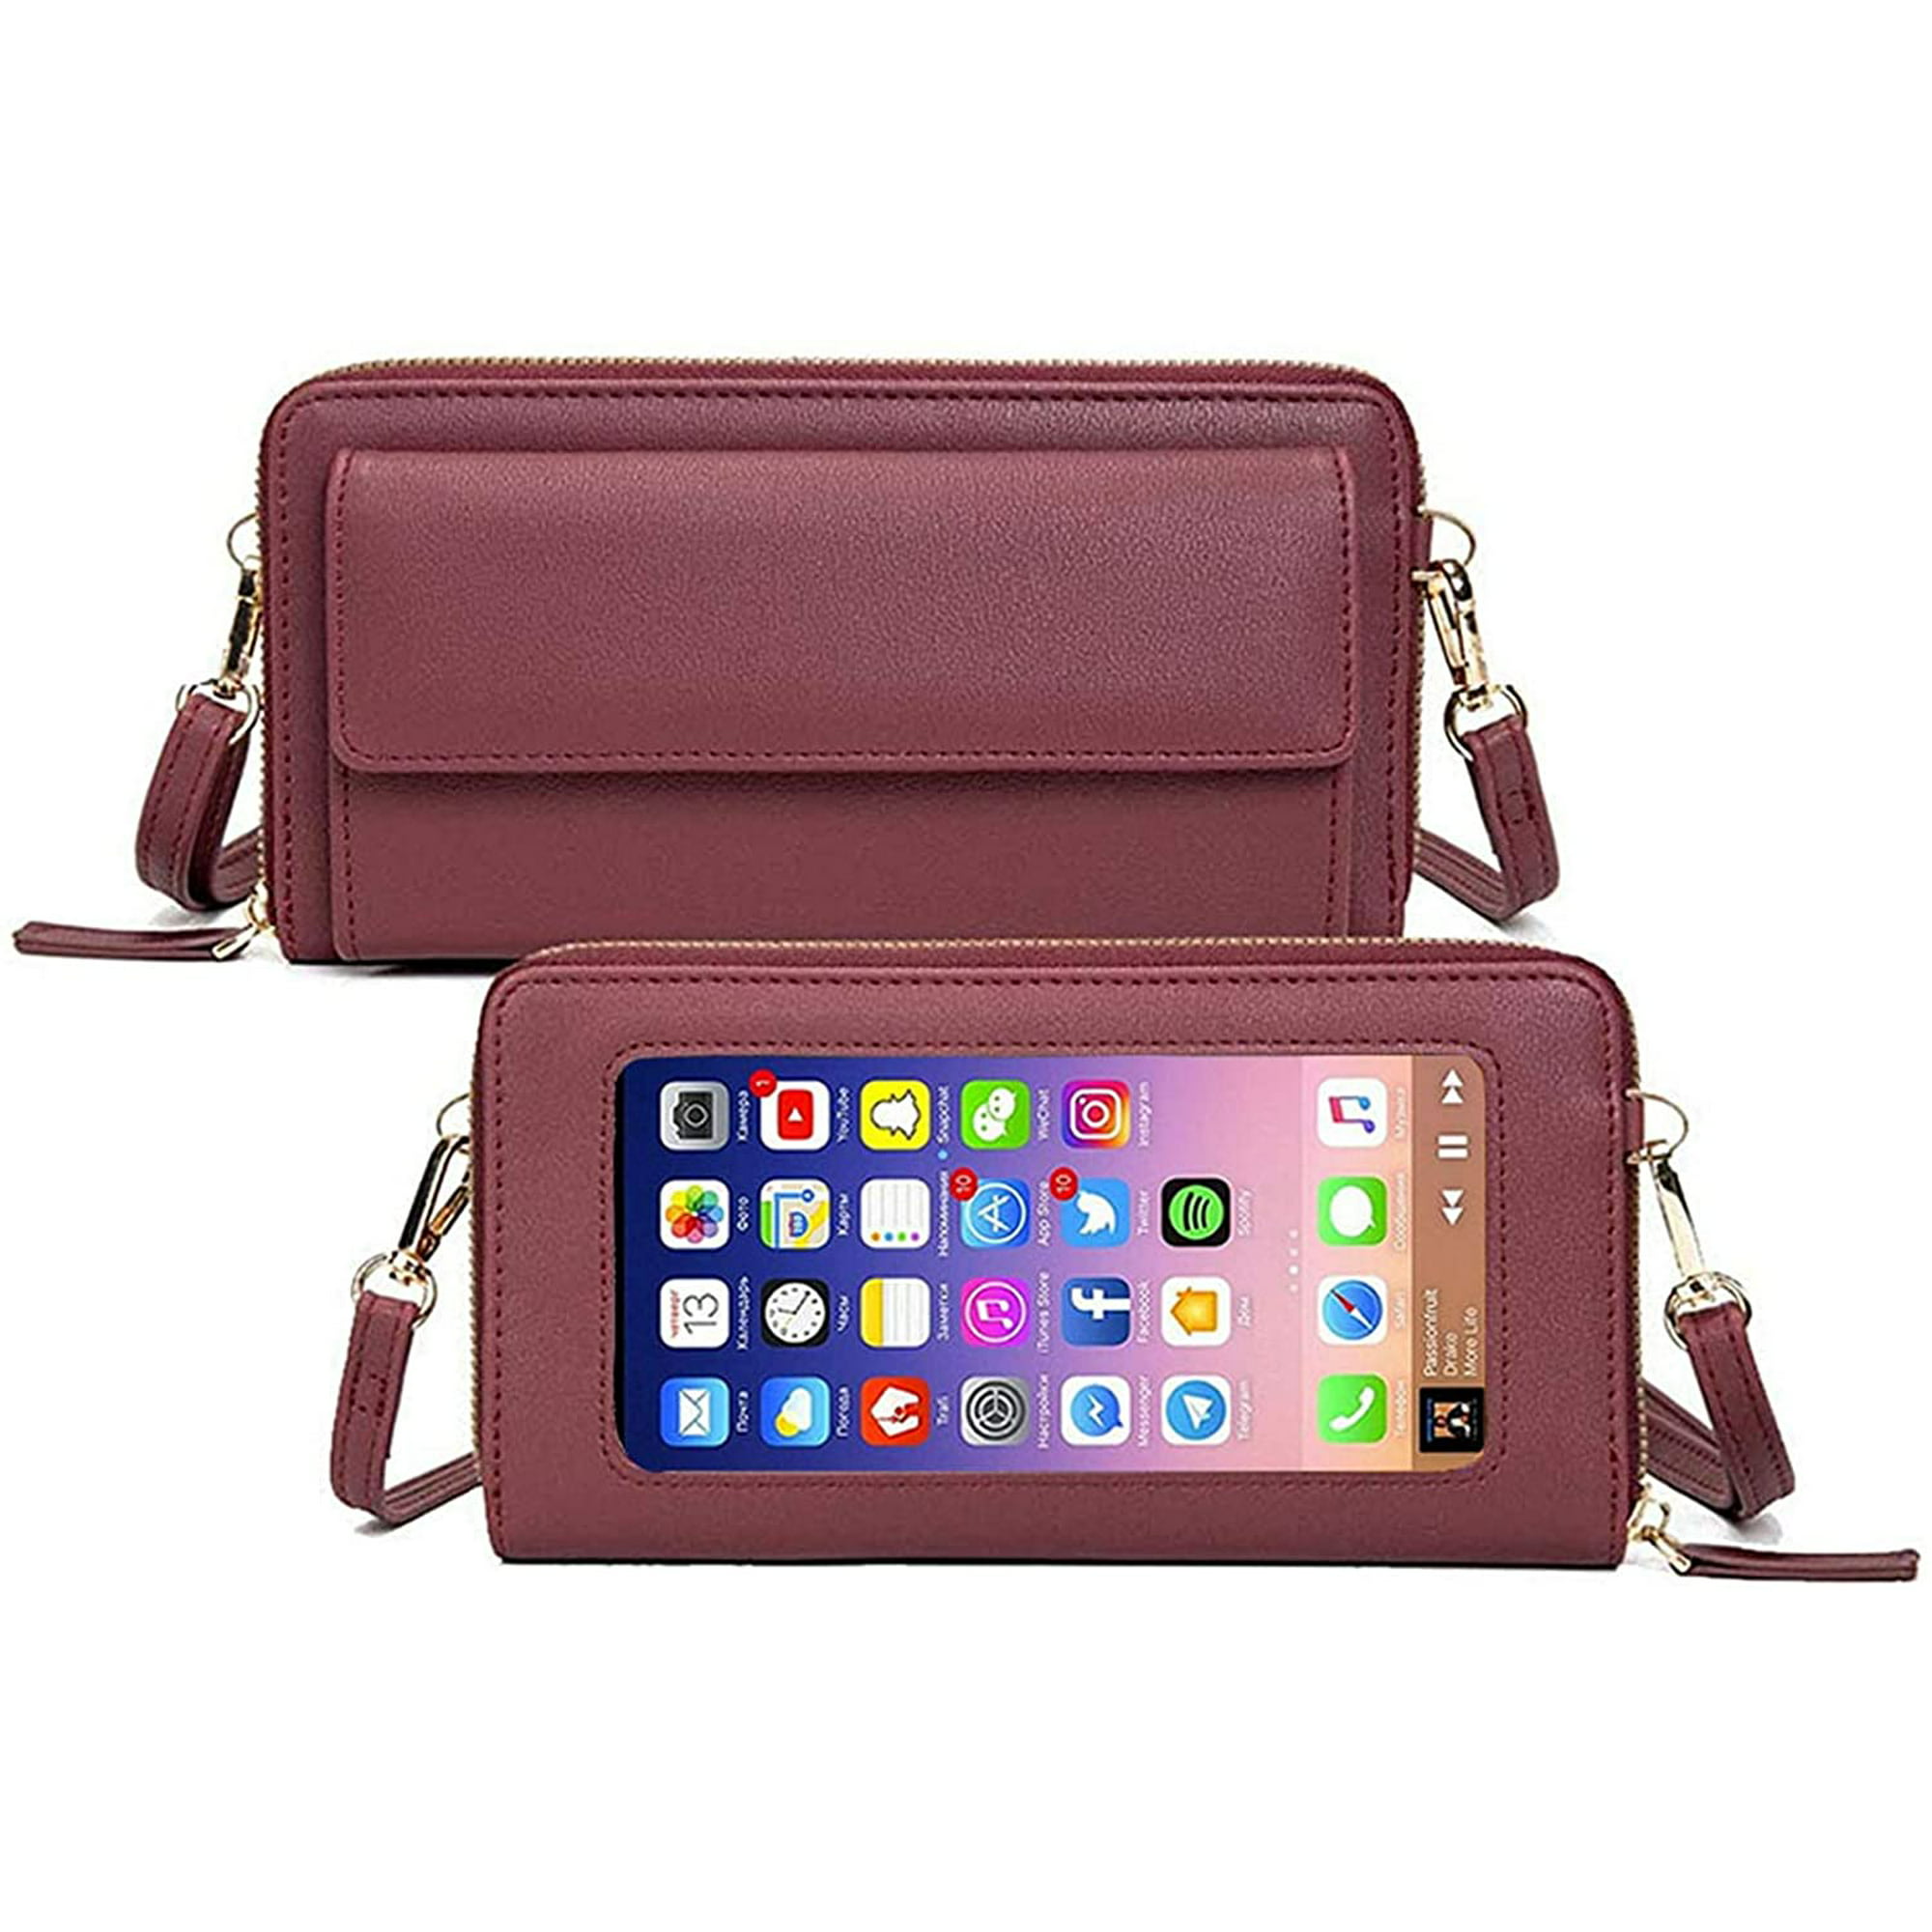  AnsTOP Small Crossbody Cell Phone Purse for Women